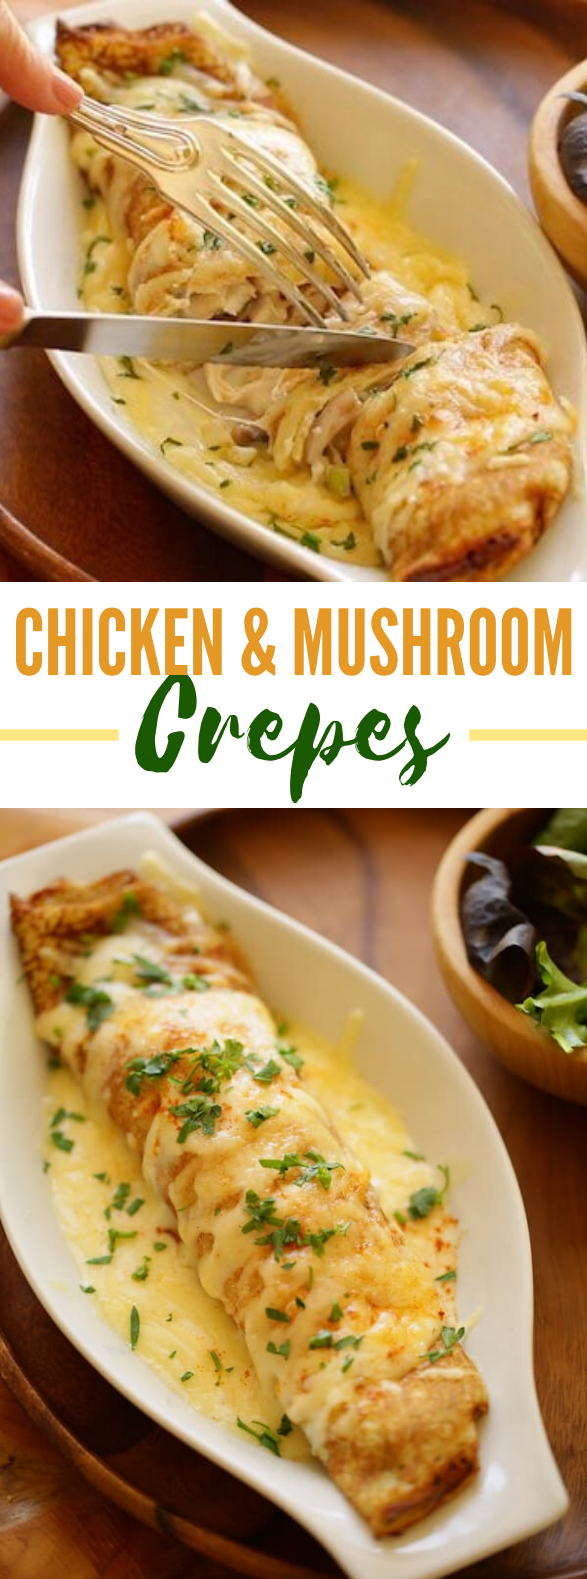 CHICKEN AND MUSHROOM CREPES #lunch #brunch